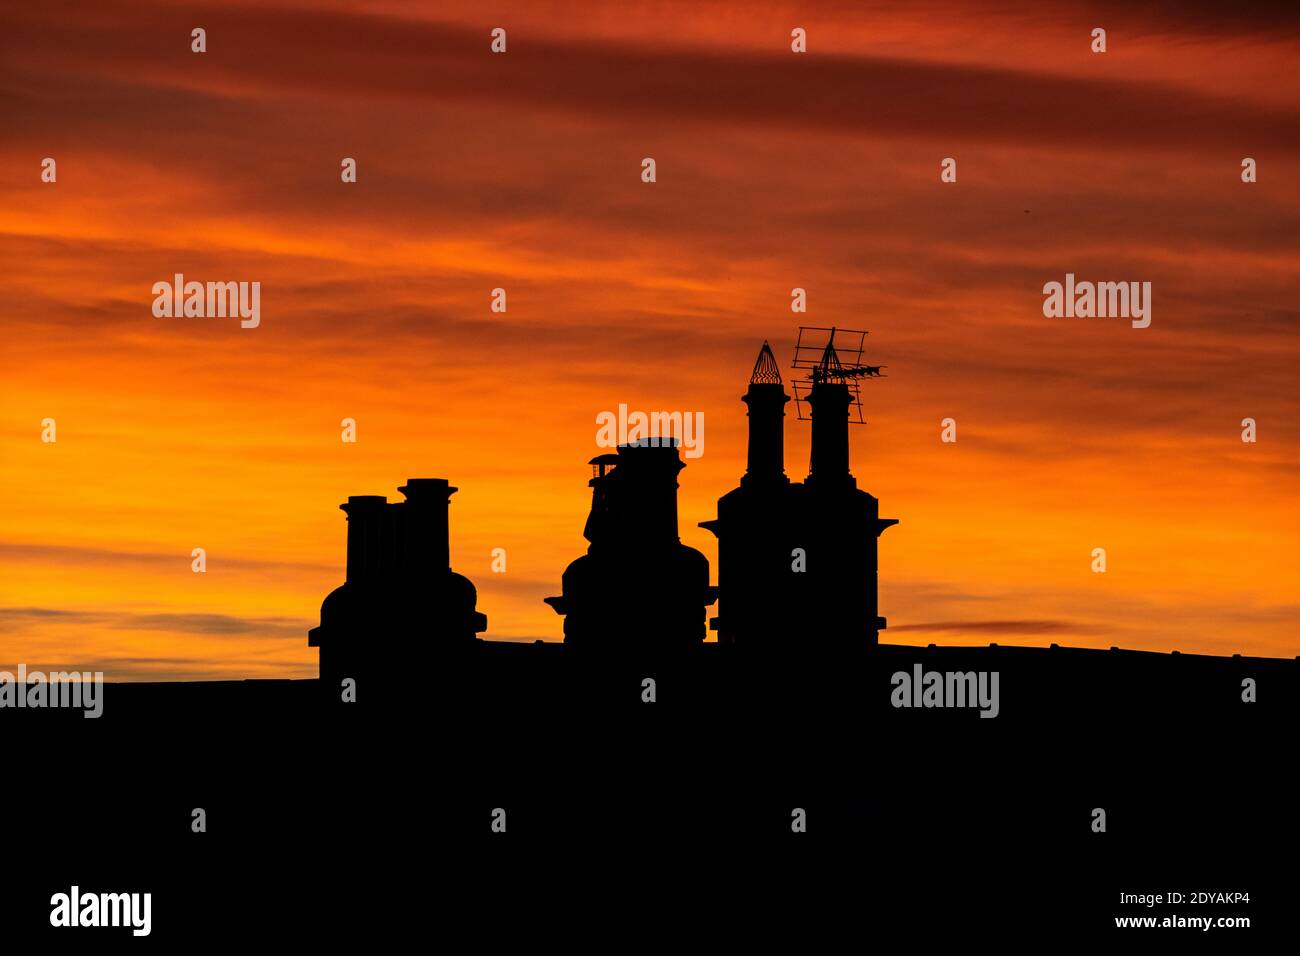 Silhouetted chimney pots against dramatic sunrise on Christmas day morning Stock Photo